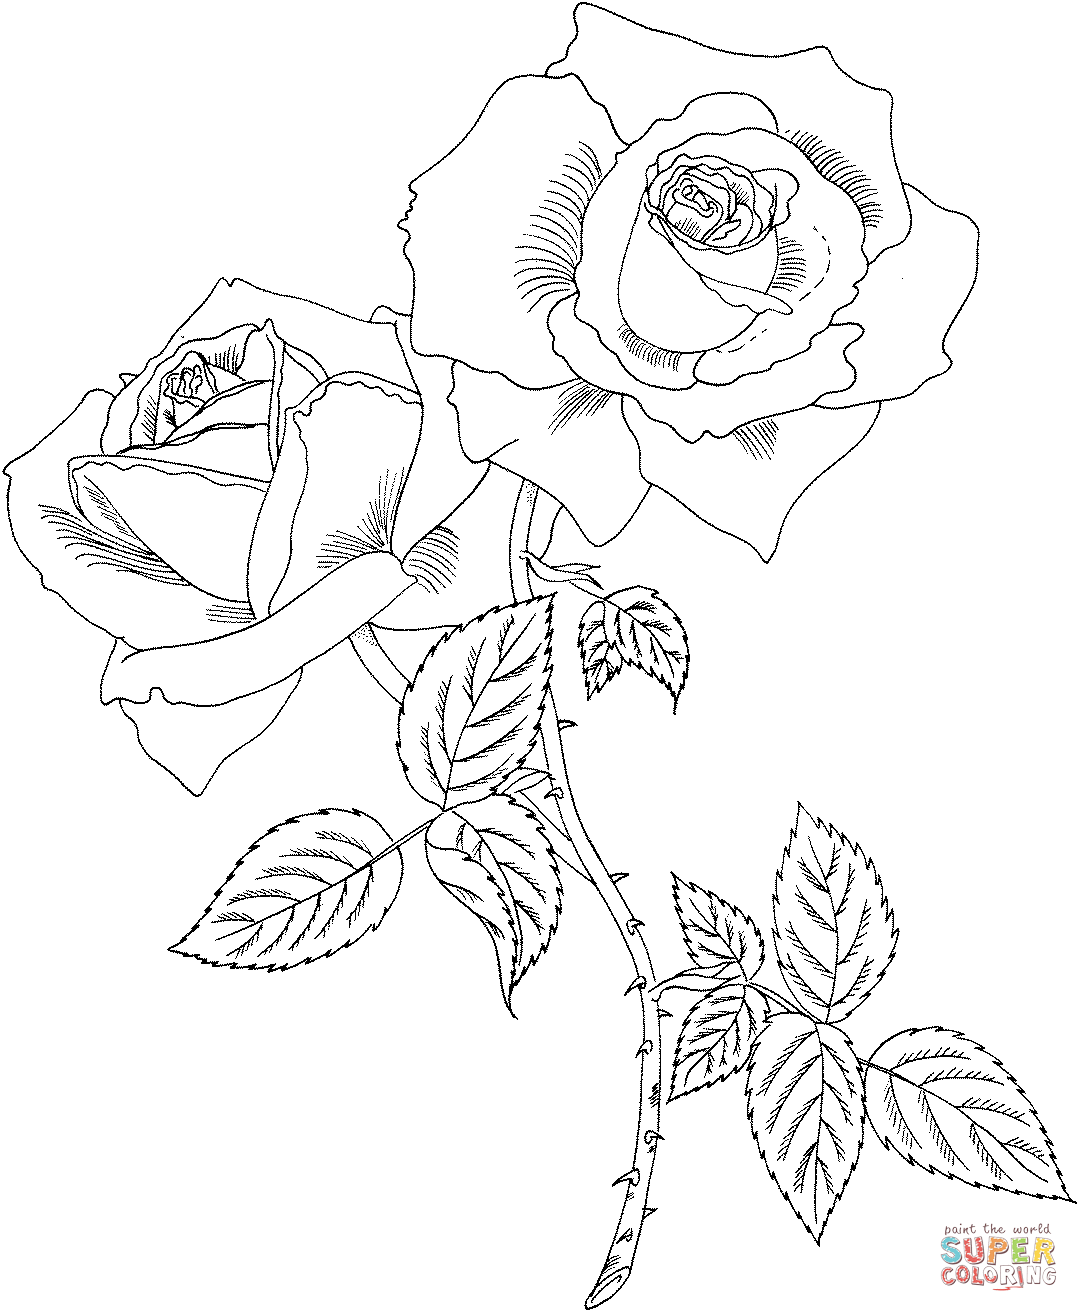 tropicana hybrid tea rose coloring pages roses coloring pages coloring pages for kids and adults